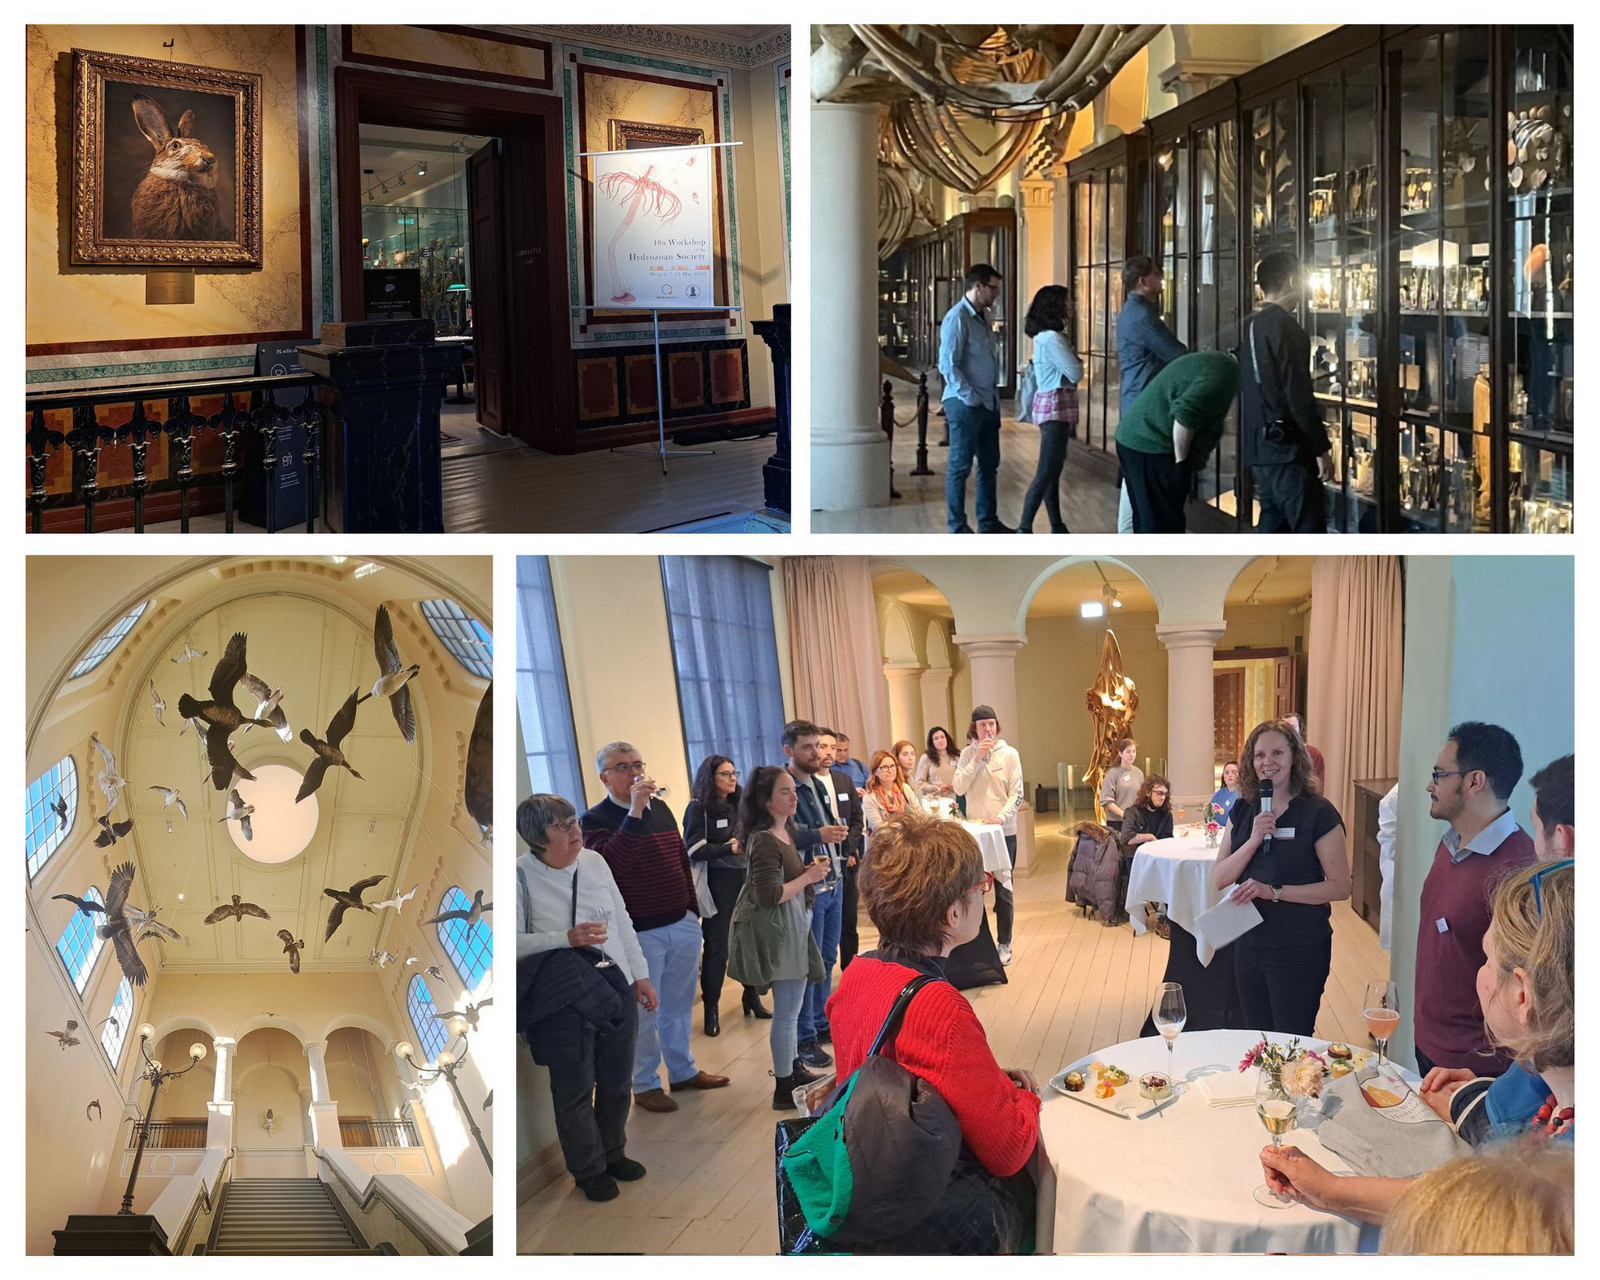 Three images together: one showing the (taxidermied) birds in the staircase of the museum exhibition, one showing participants studying the exhibits in the whale hall - a whale skeleton can be seen over them, and a photo from the reception where the society president is welcoming everyone 